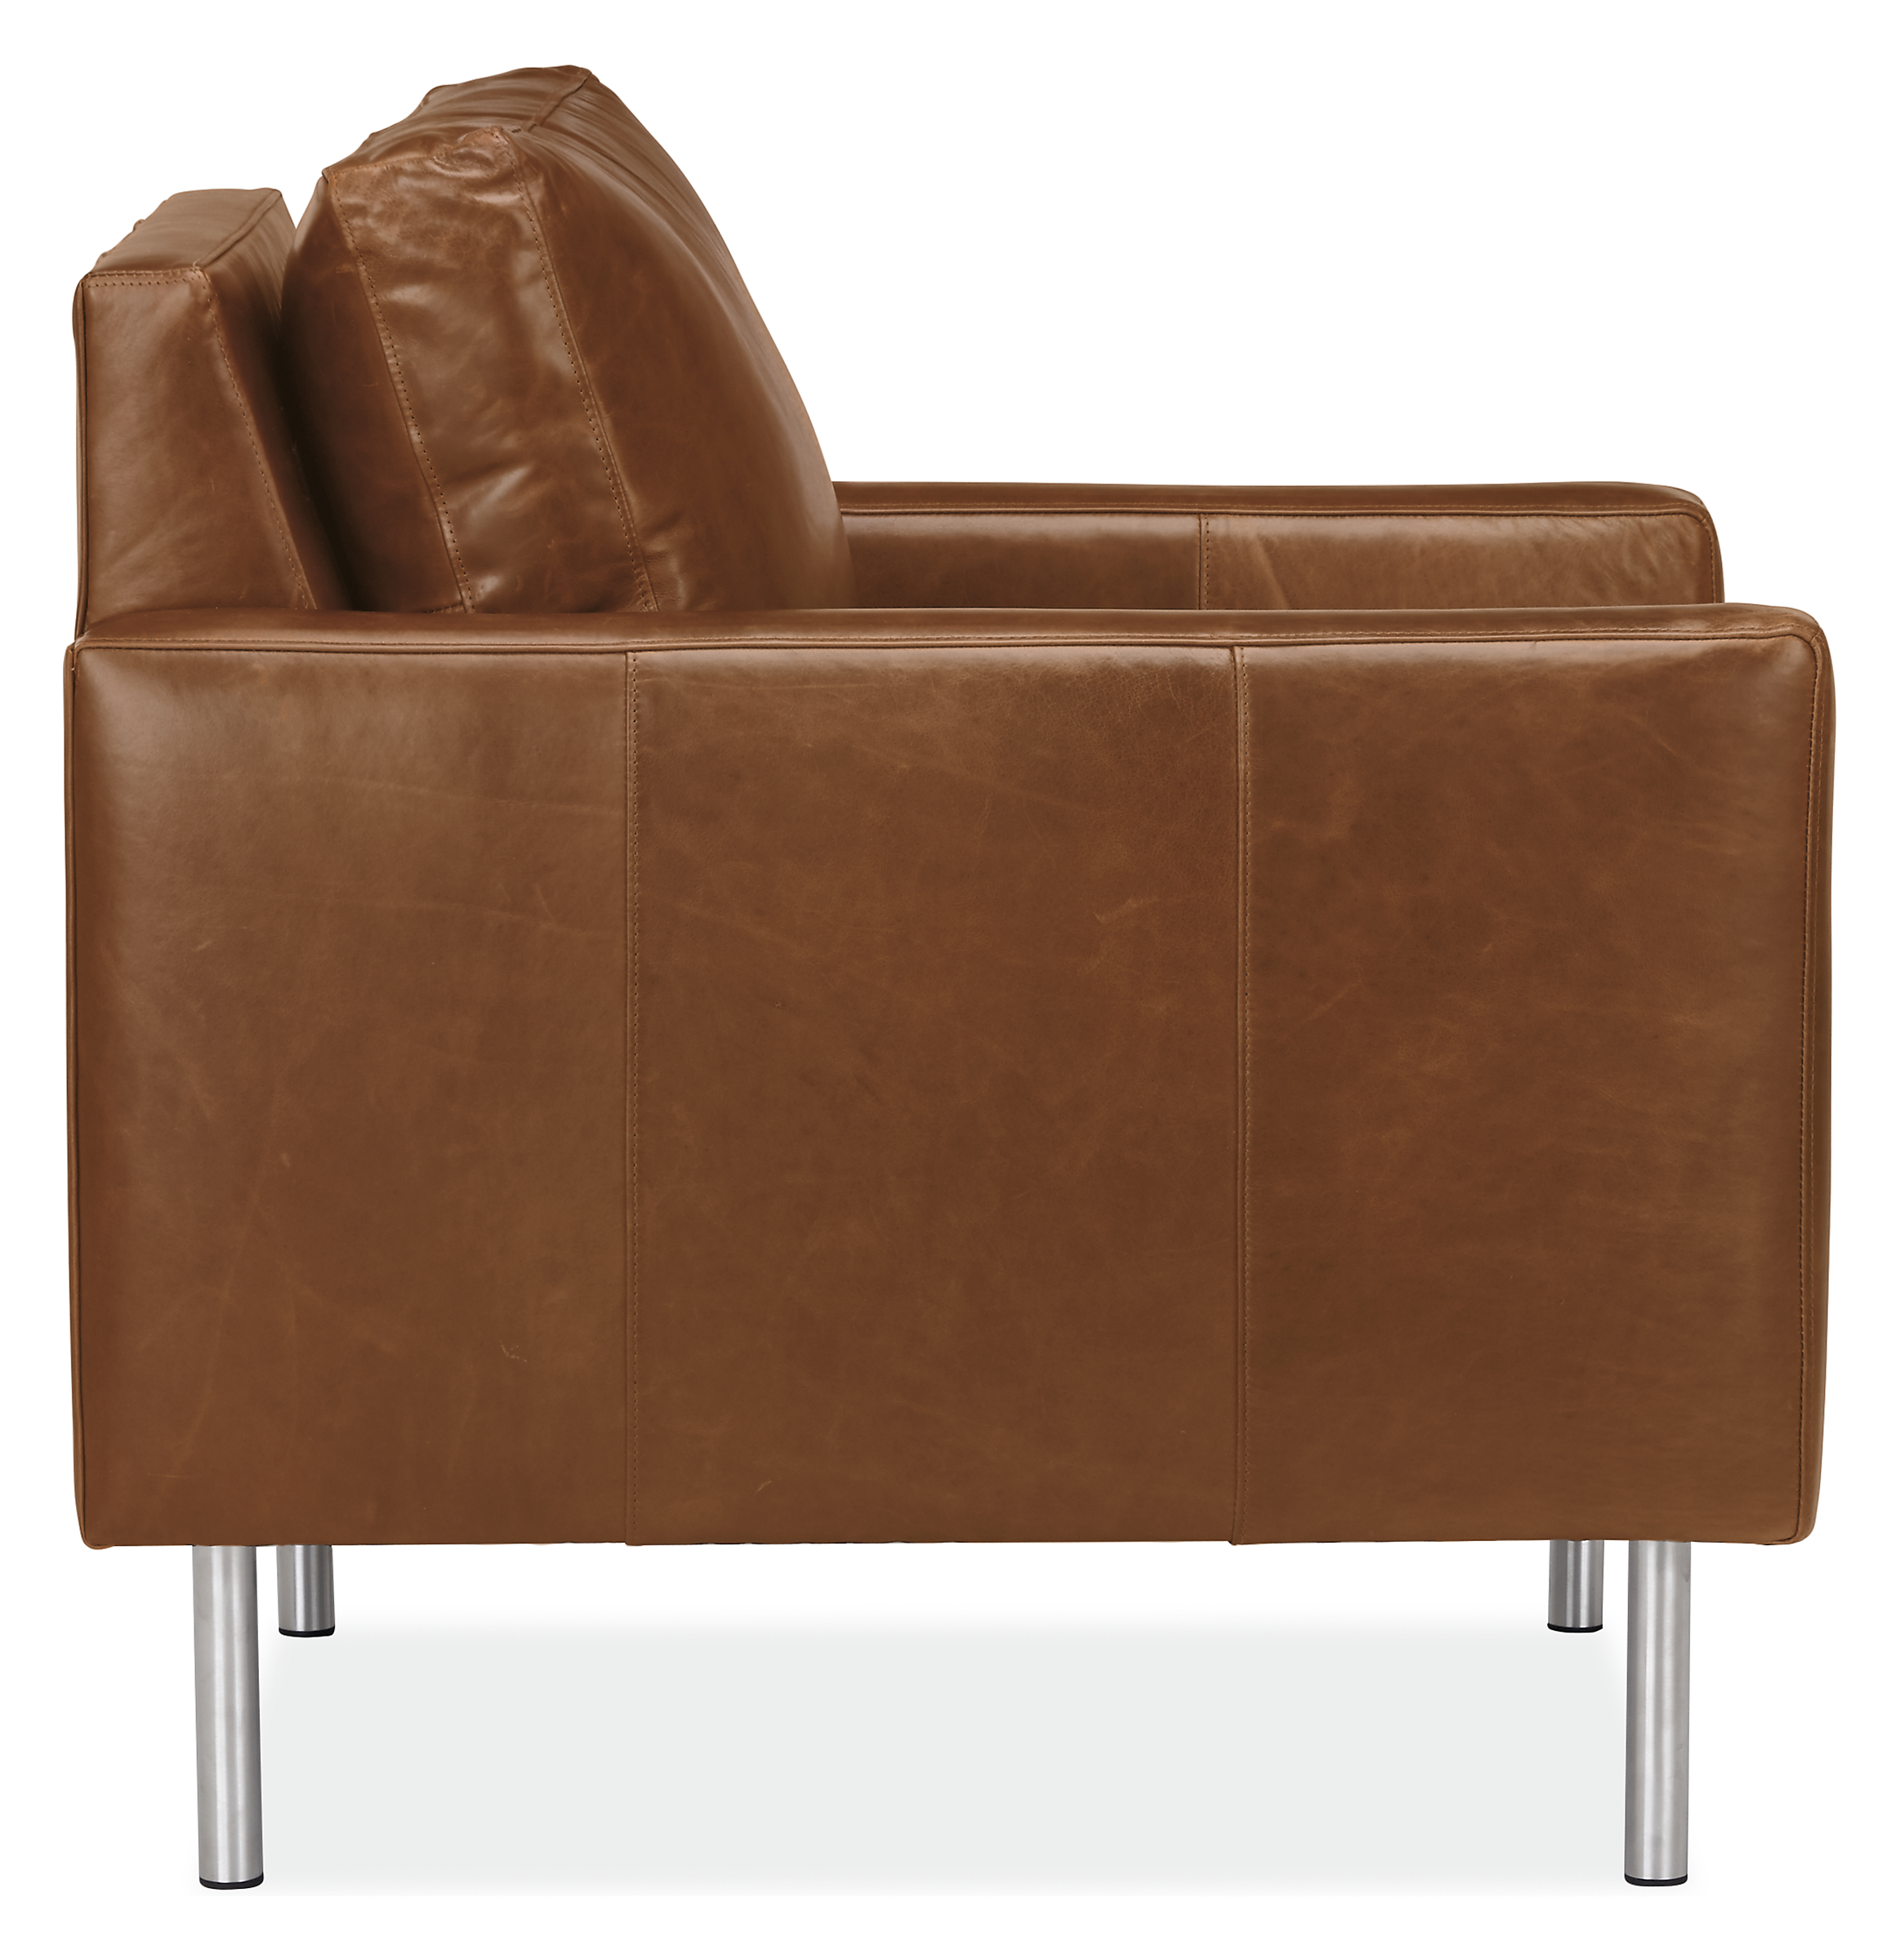 Side view of Jasper 30 Chair in Vento Leather with Metal Legs.